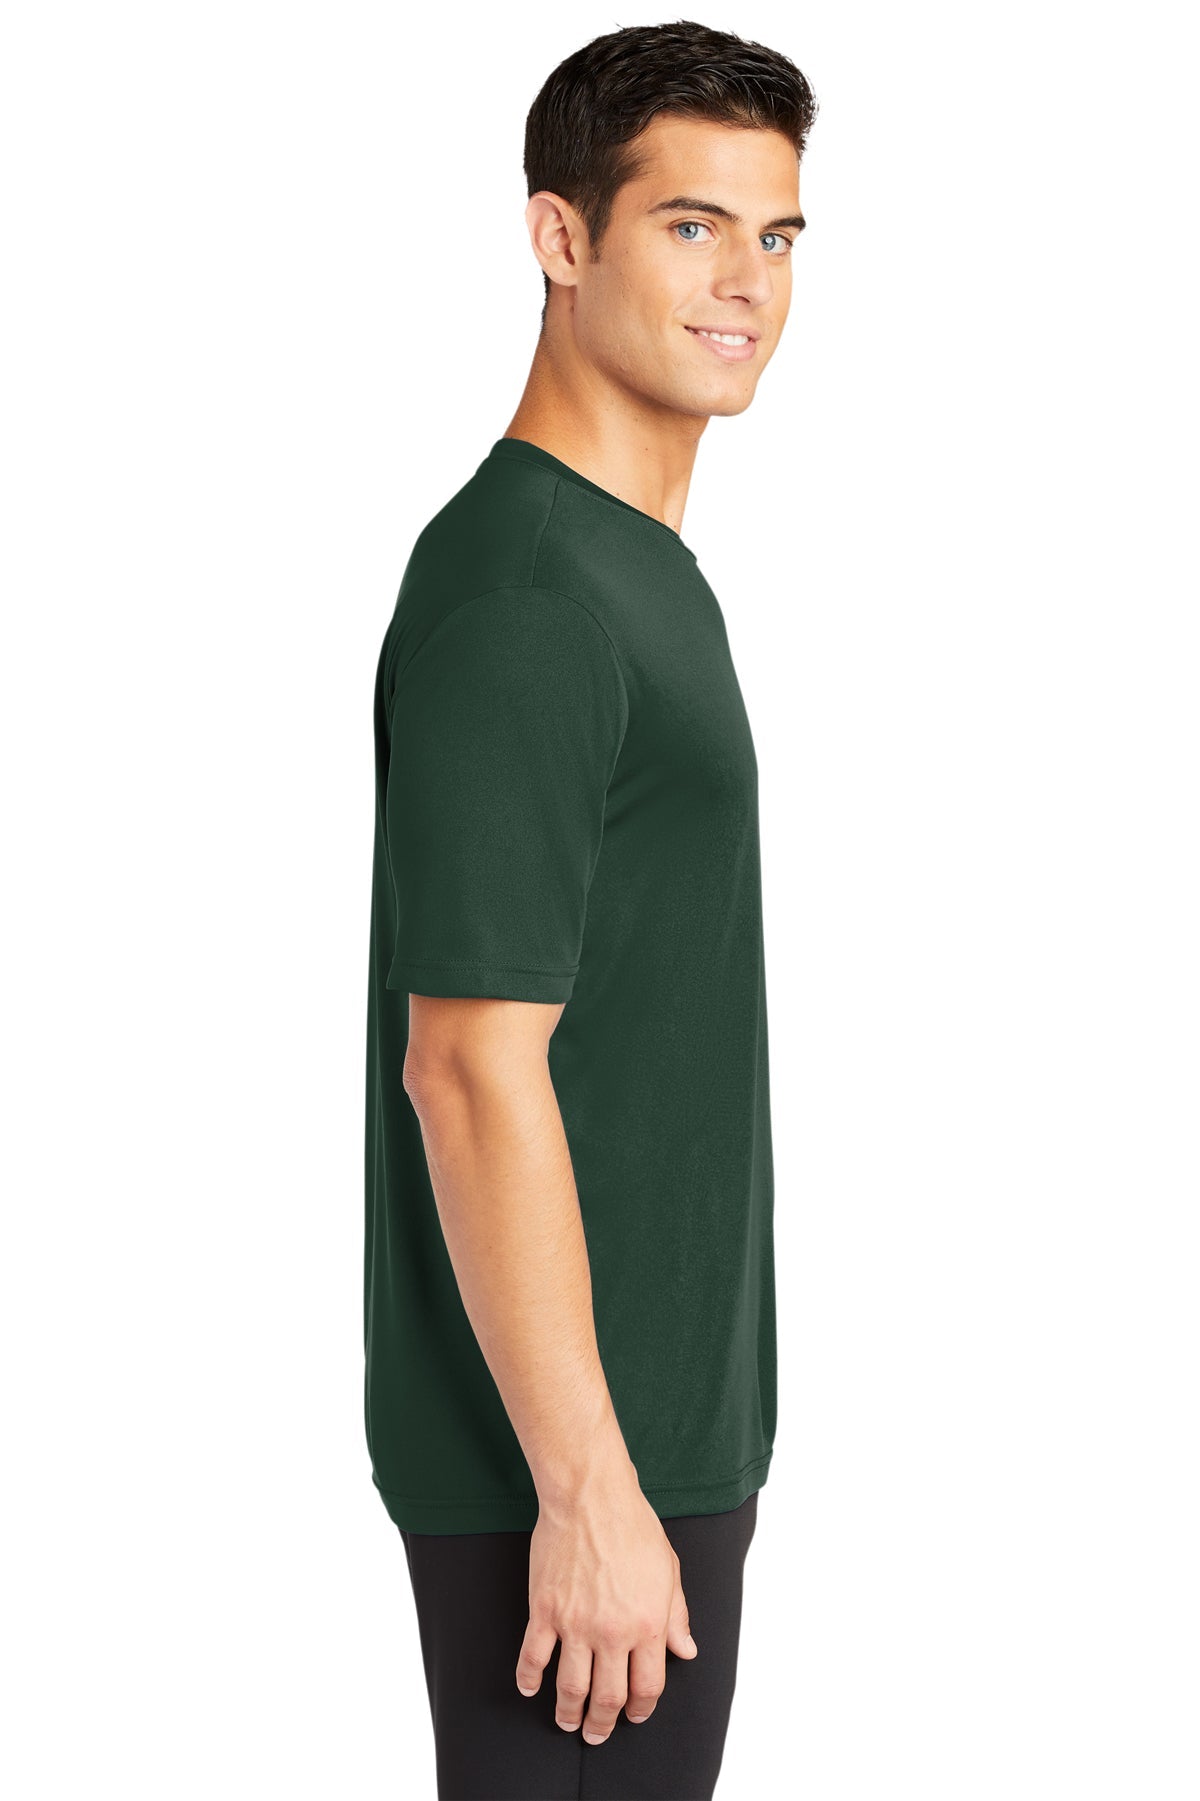 Sport-Tek Tall PosiCharge Custom Competitor Tee's, Forest Green